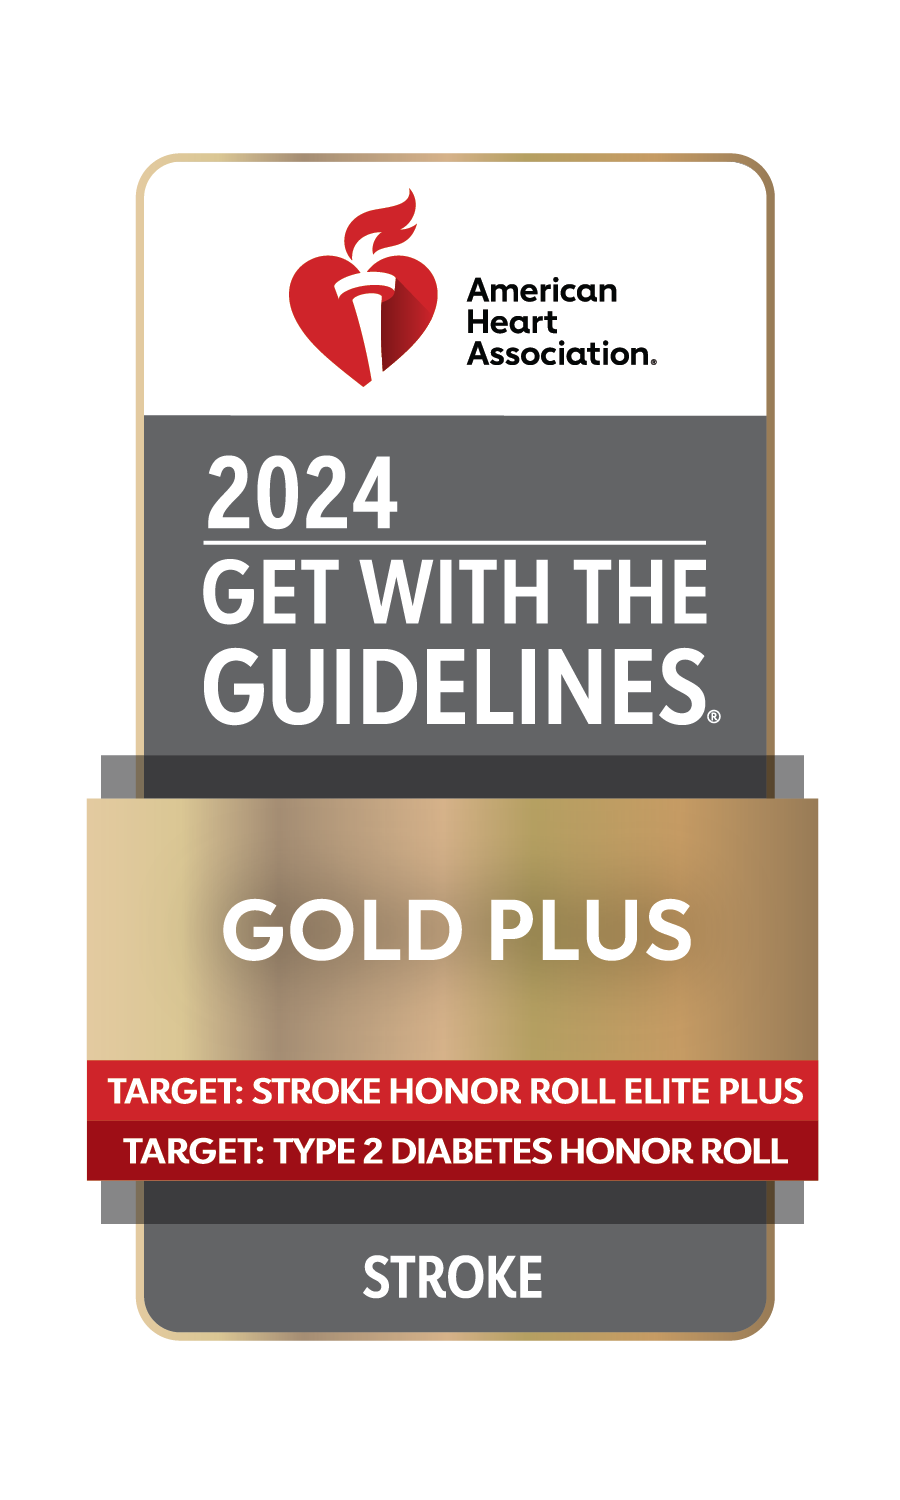 Get With the Guidelines Stroke 2021